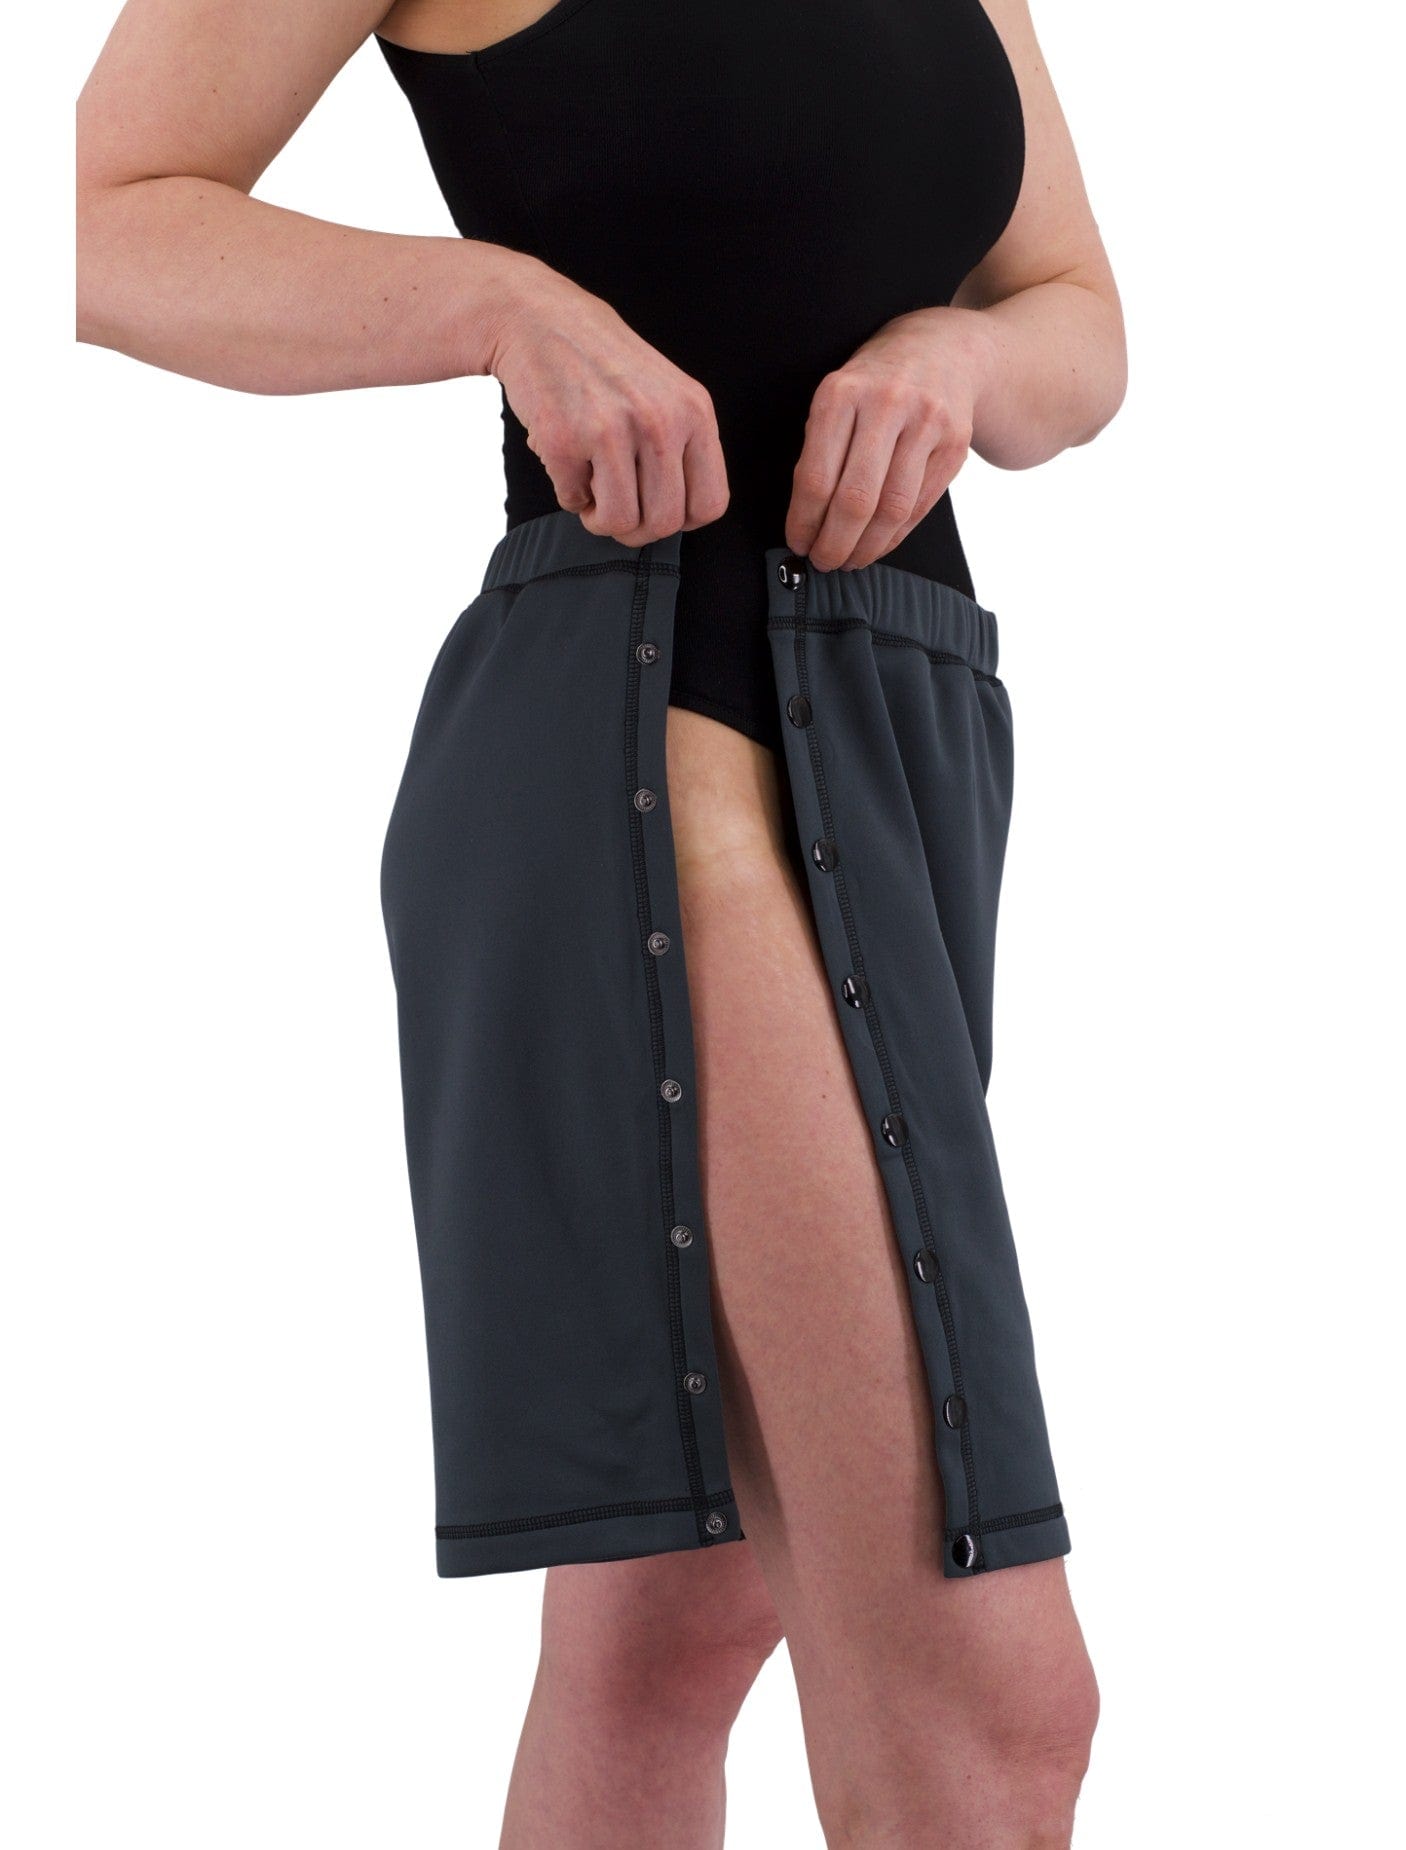 Post Surgery Tearaway Shorts with Side Snap Buttons, Unisex for Men and  Women